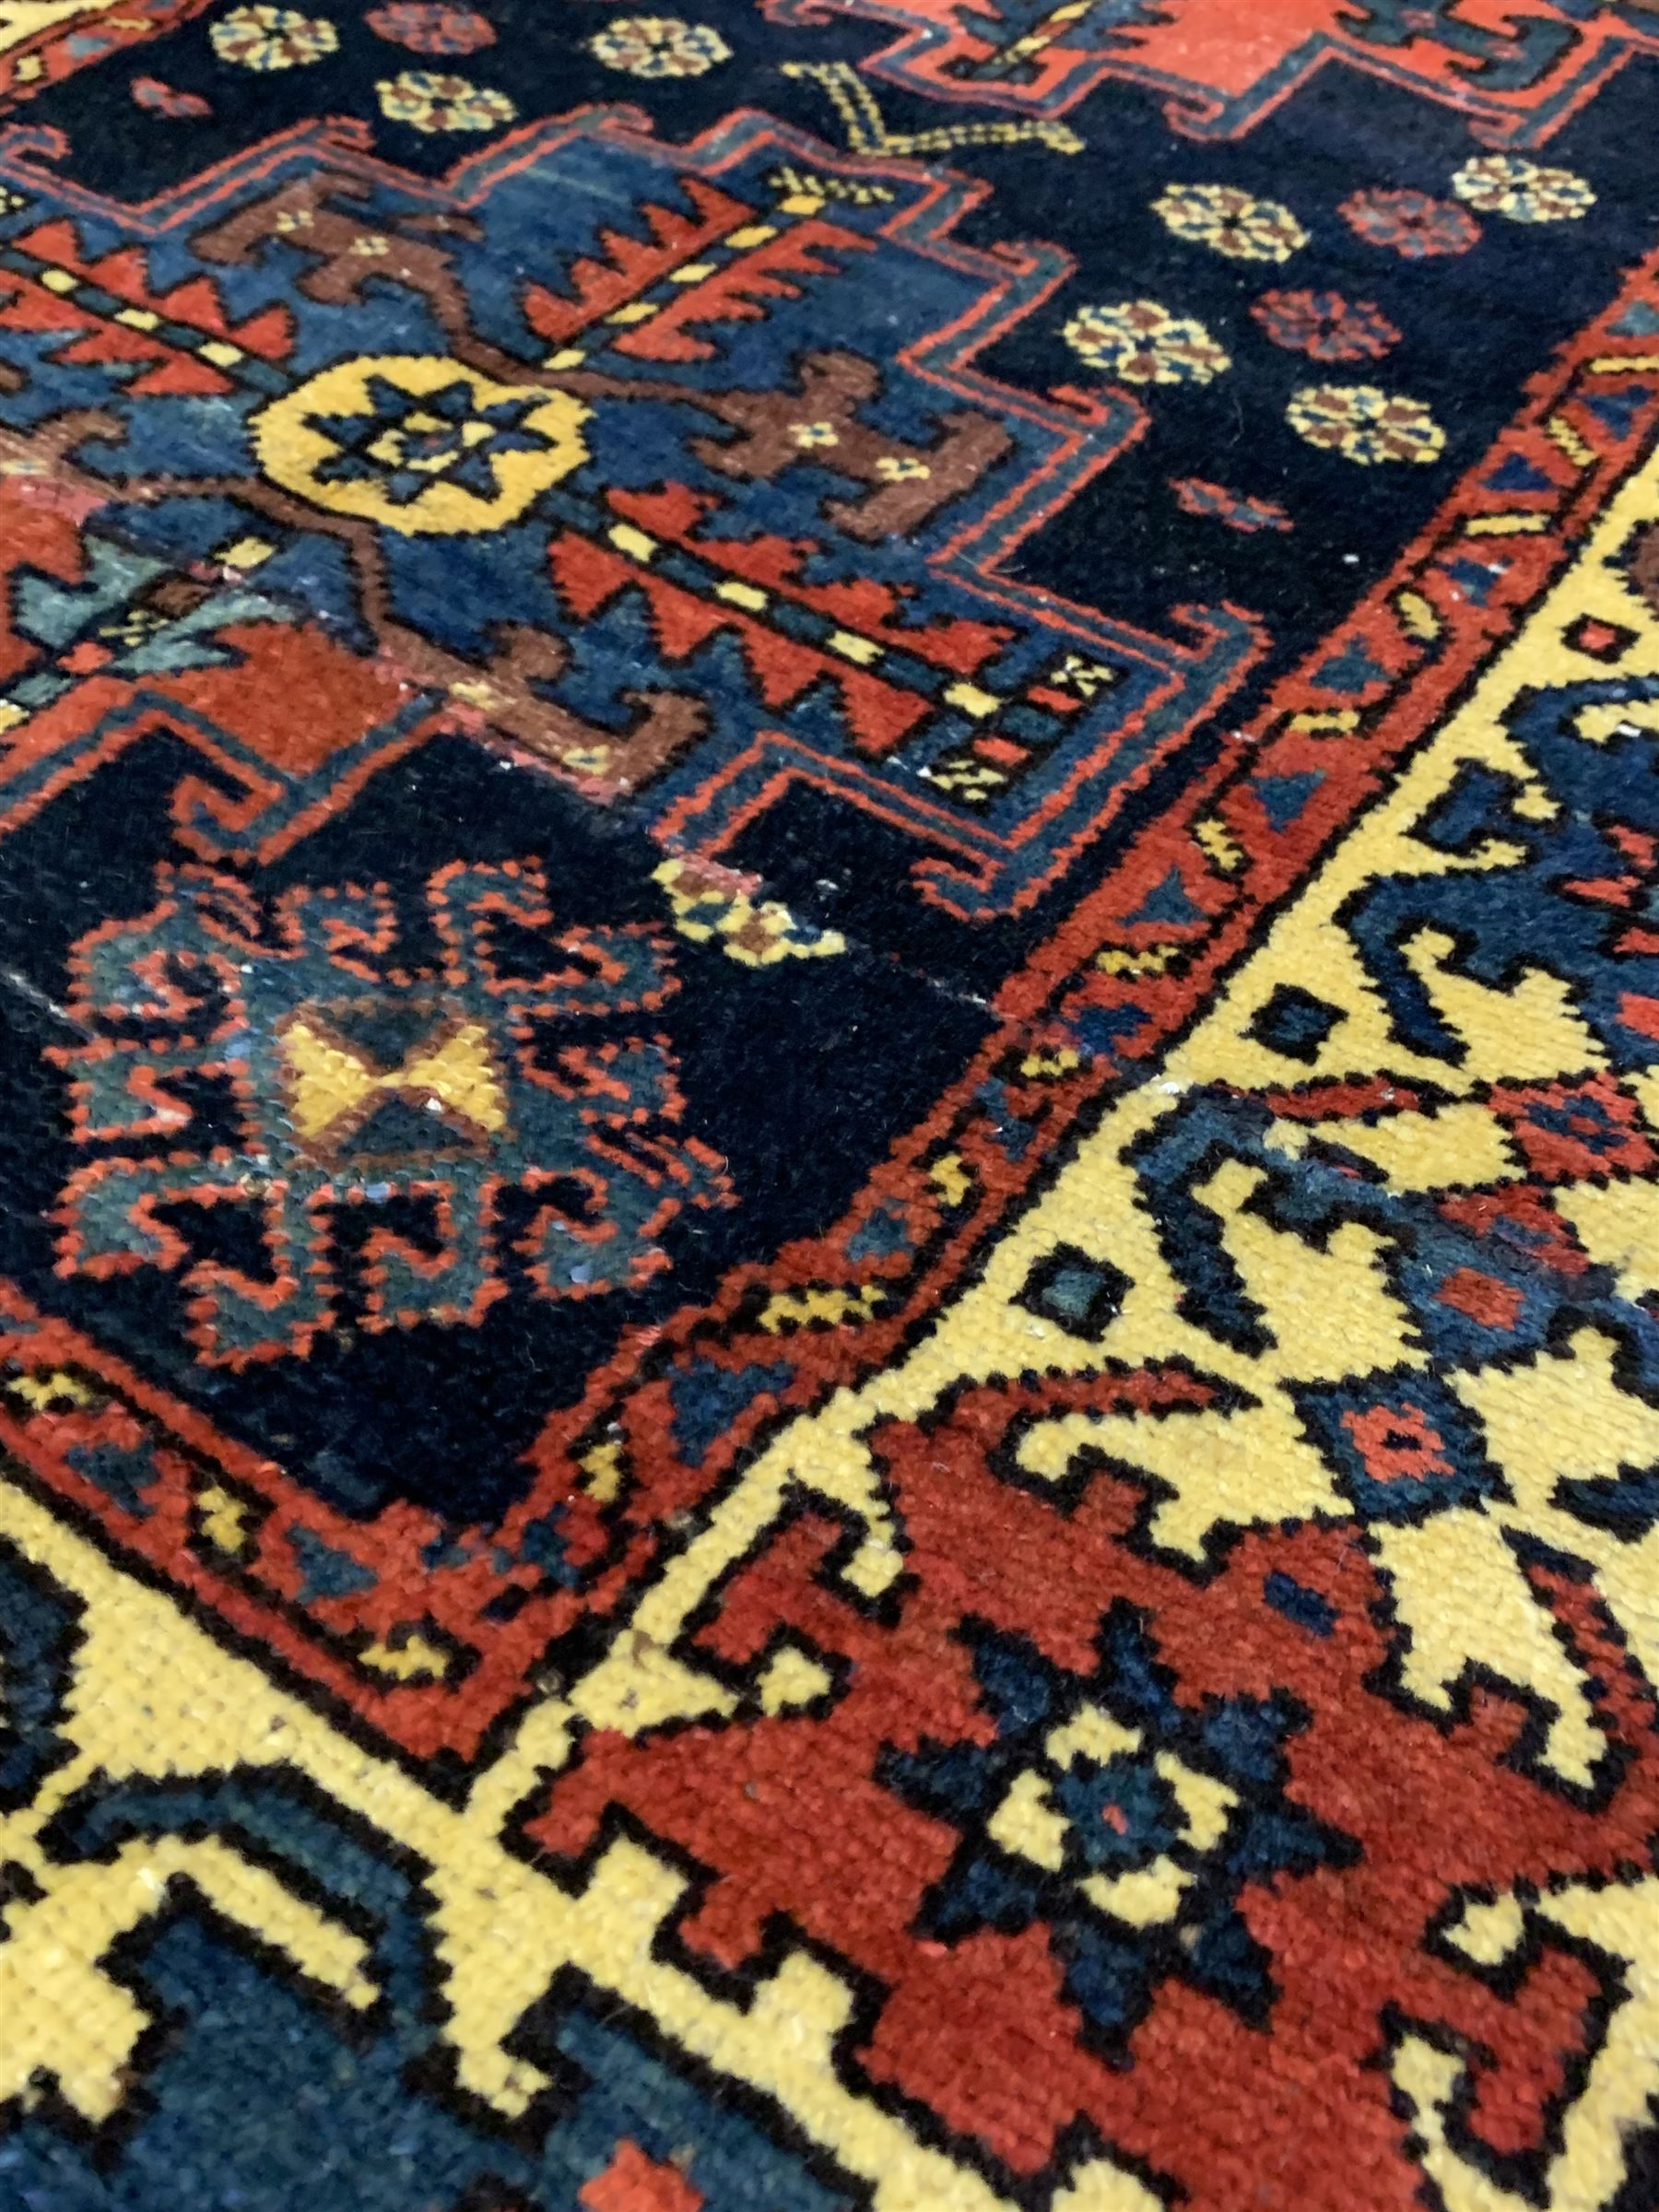 Persian Herriz runner rug of blues reds and browns - Image 3 of 3